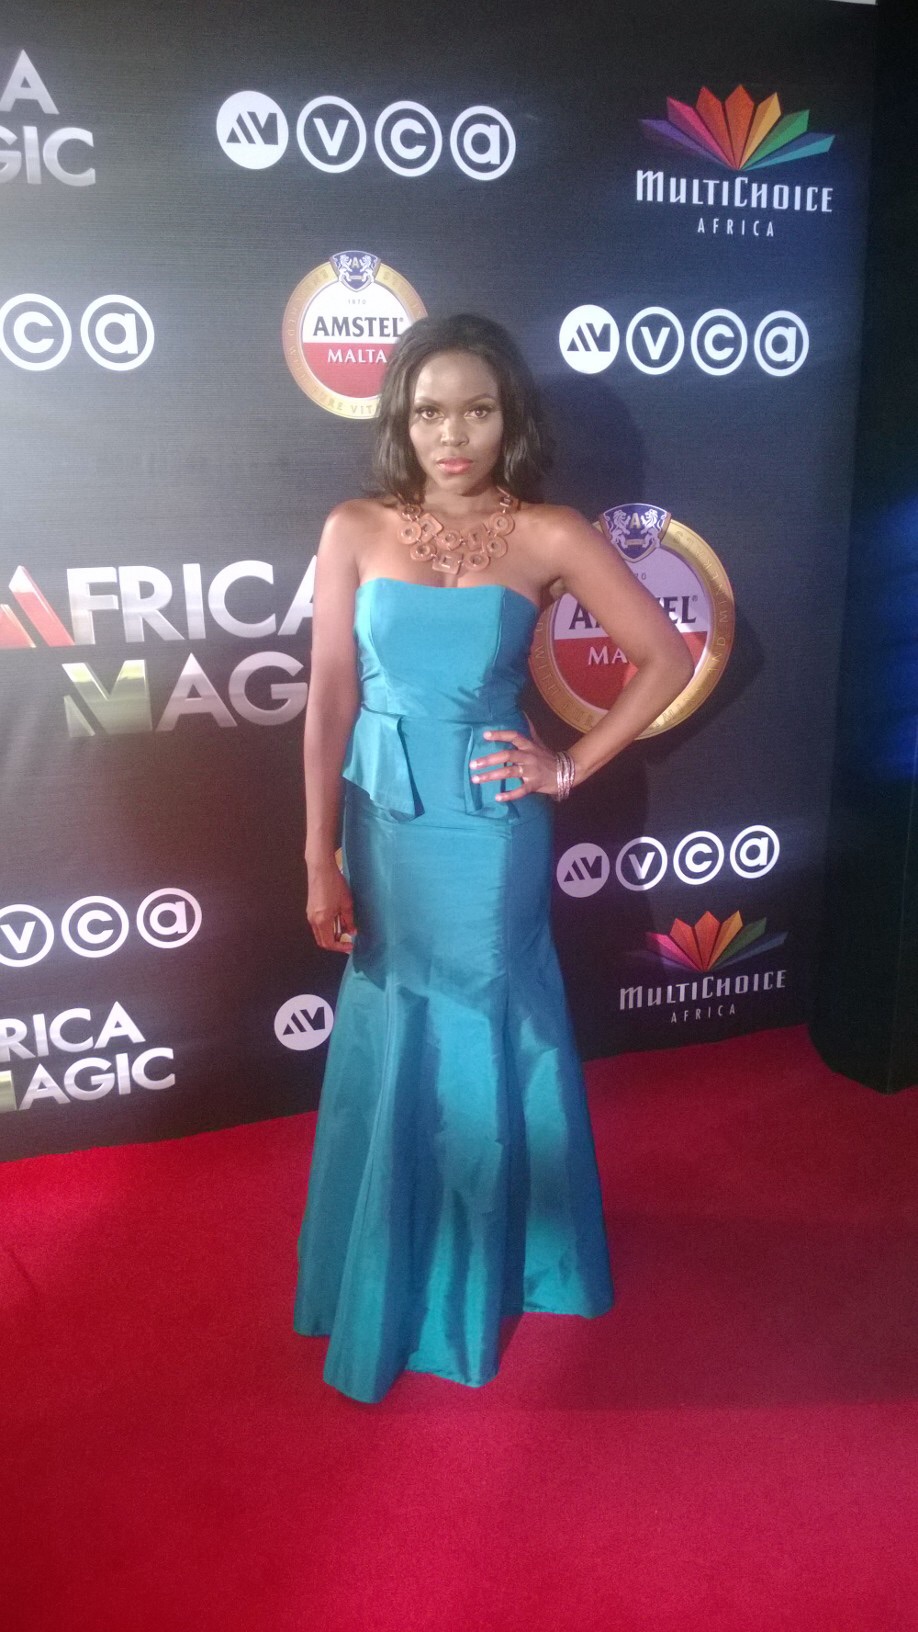 On the red carpet AMVCA 2015 in Lagos